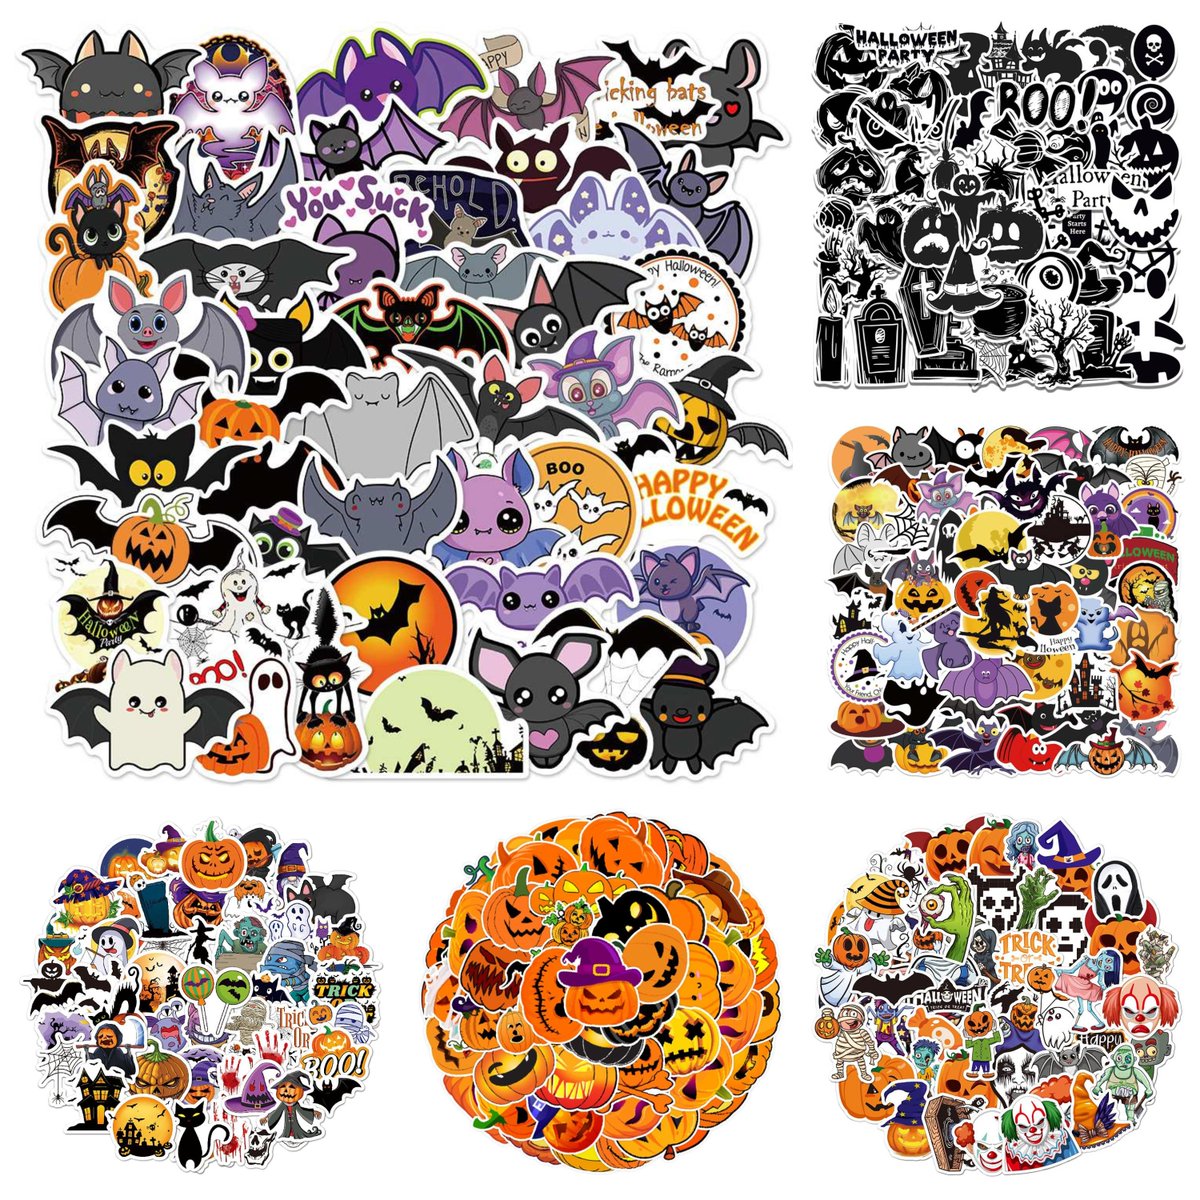 50 x #HALLOWEEN Vinyl PVC #Stickers #Scrapbooking #PartyBags #Crafts #cardmaking #craftsupplies #luggage #suitcasestickers #etsy #etsyuk #etsyshop by Saph1re etsy.me/44maeRb via @Etsy